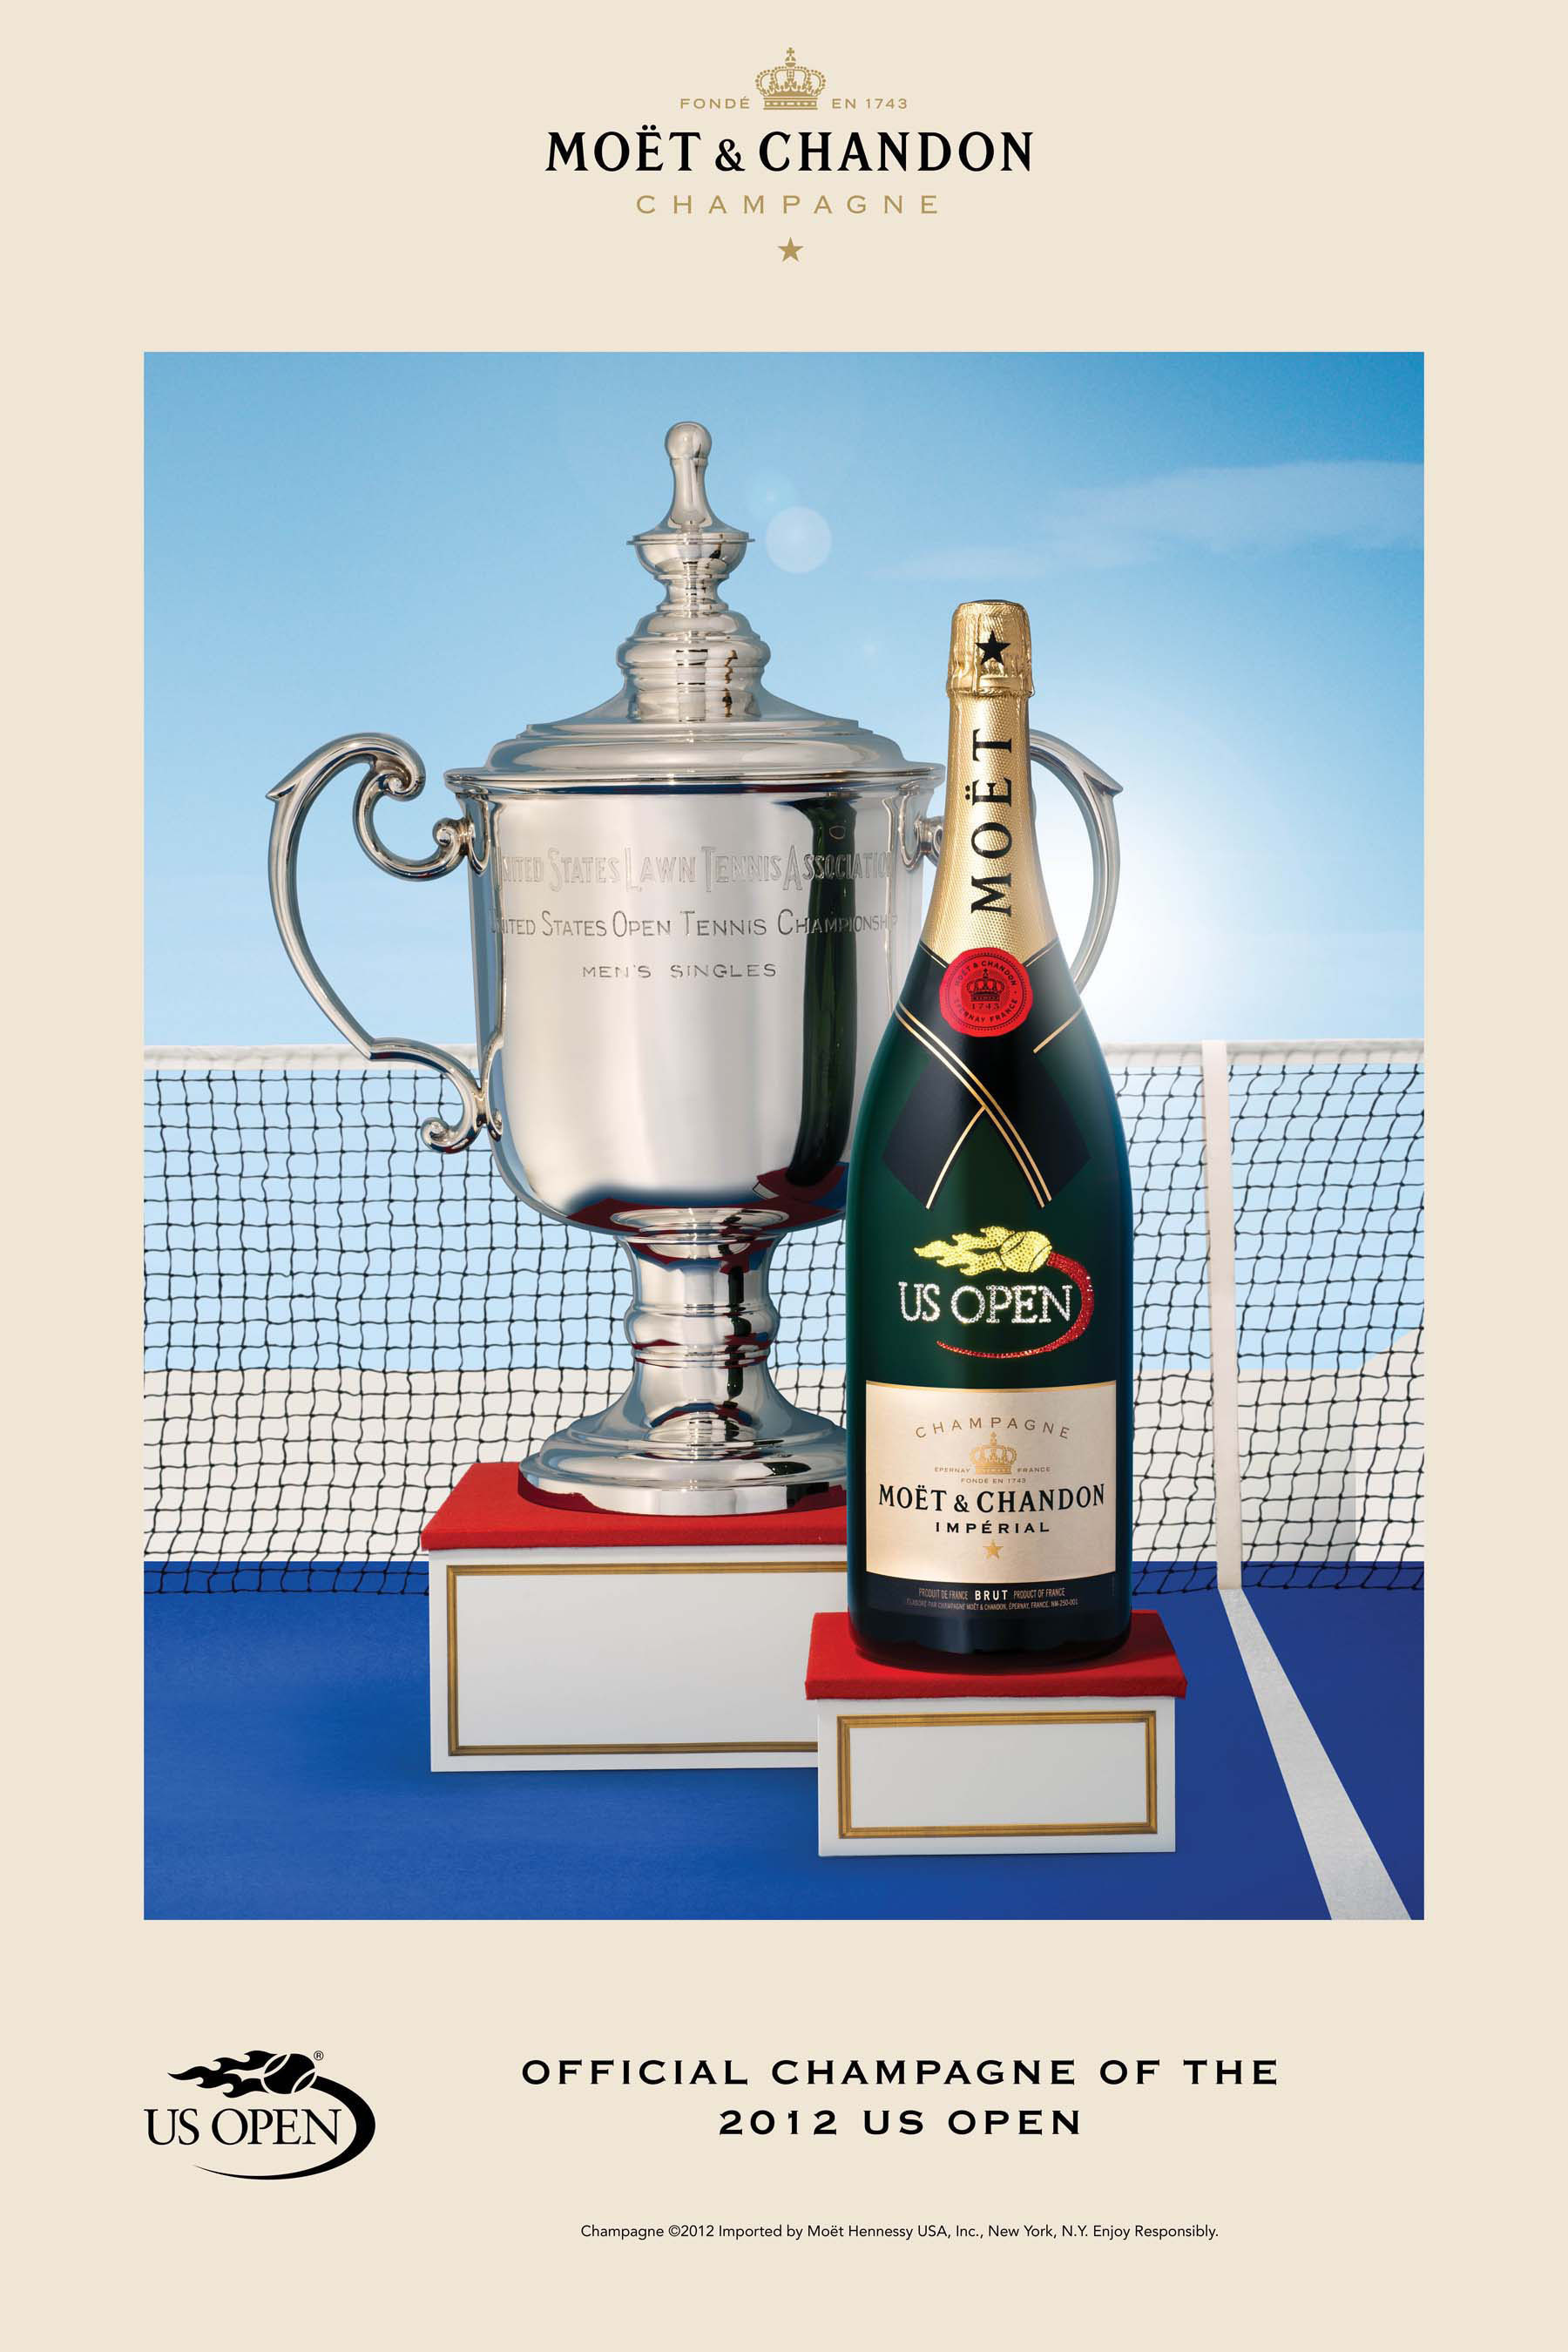 Moet & Chandon Returns to the US Open to Celebrate Tennis as the